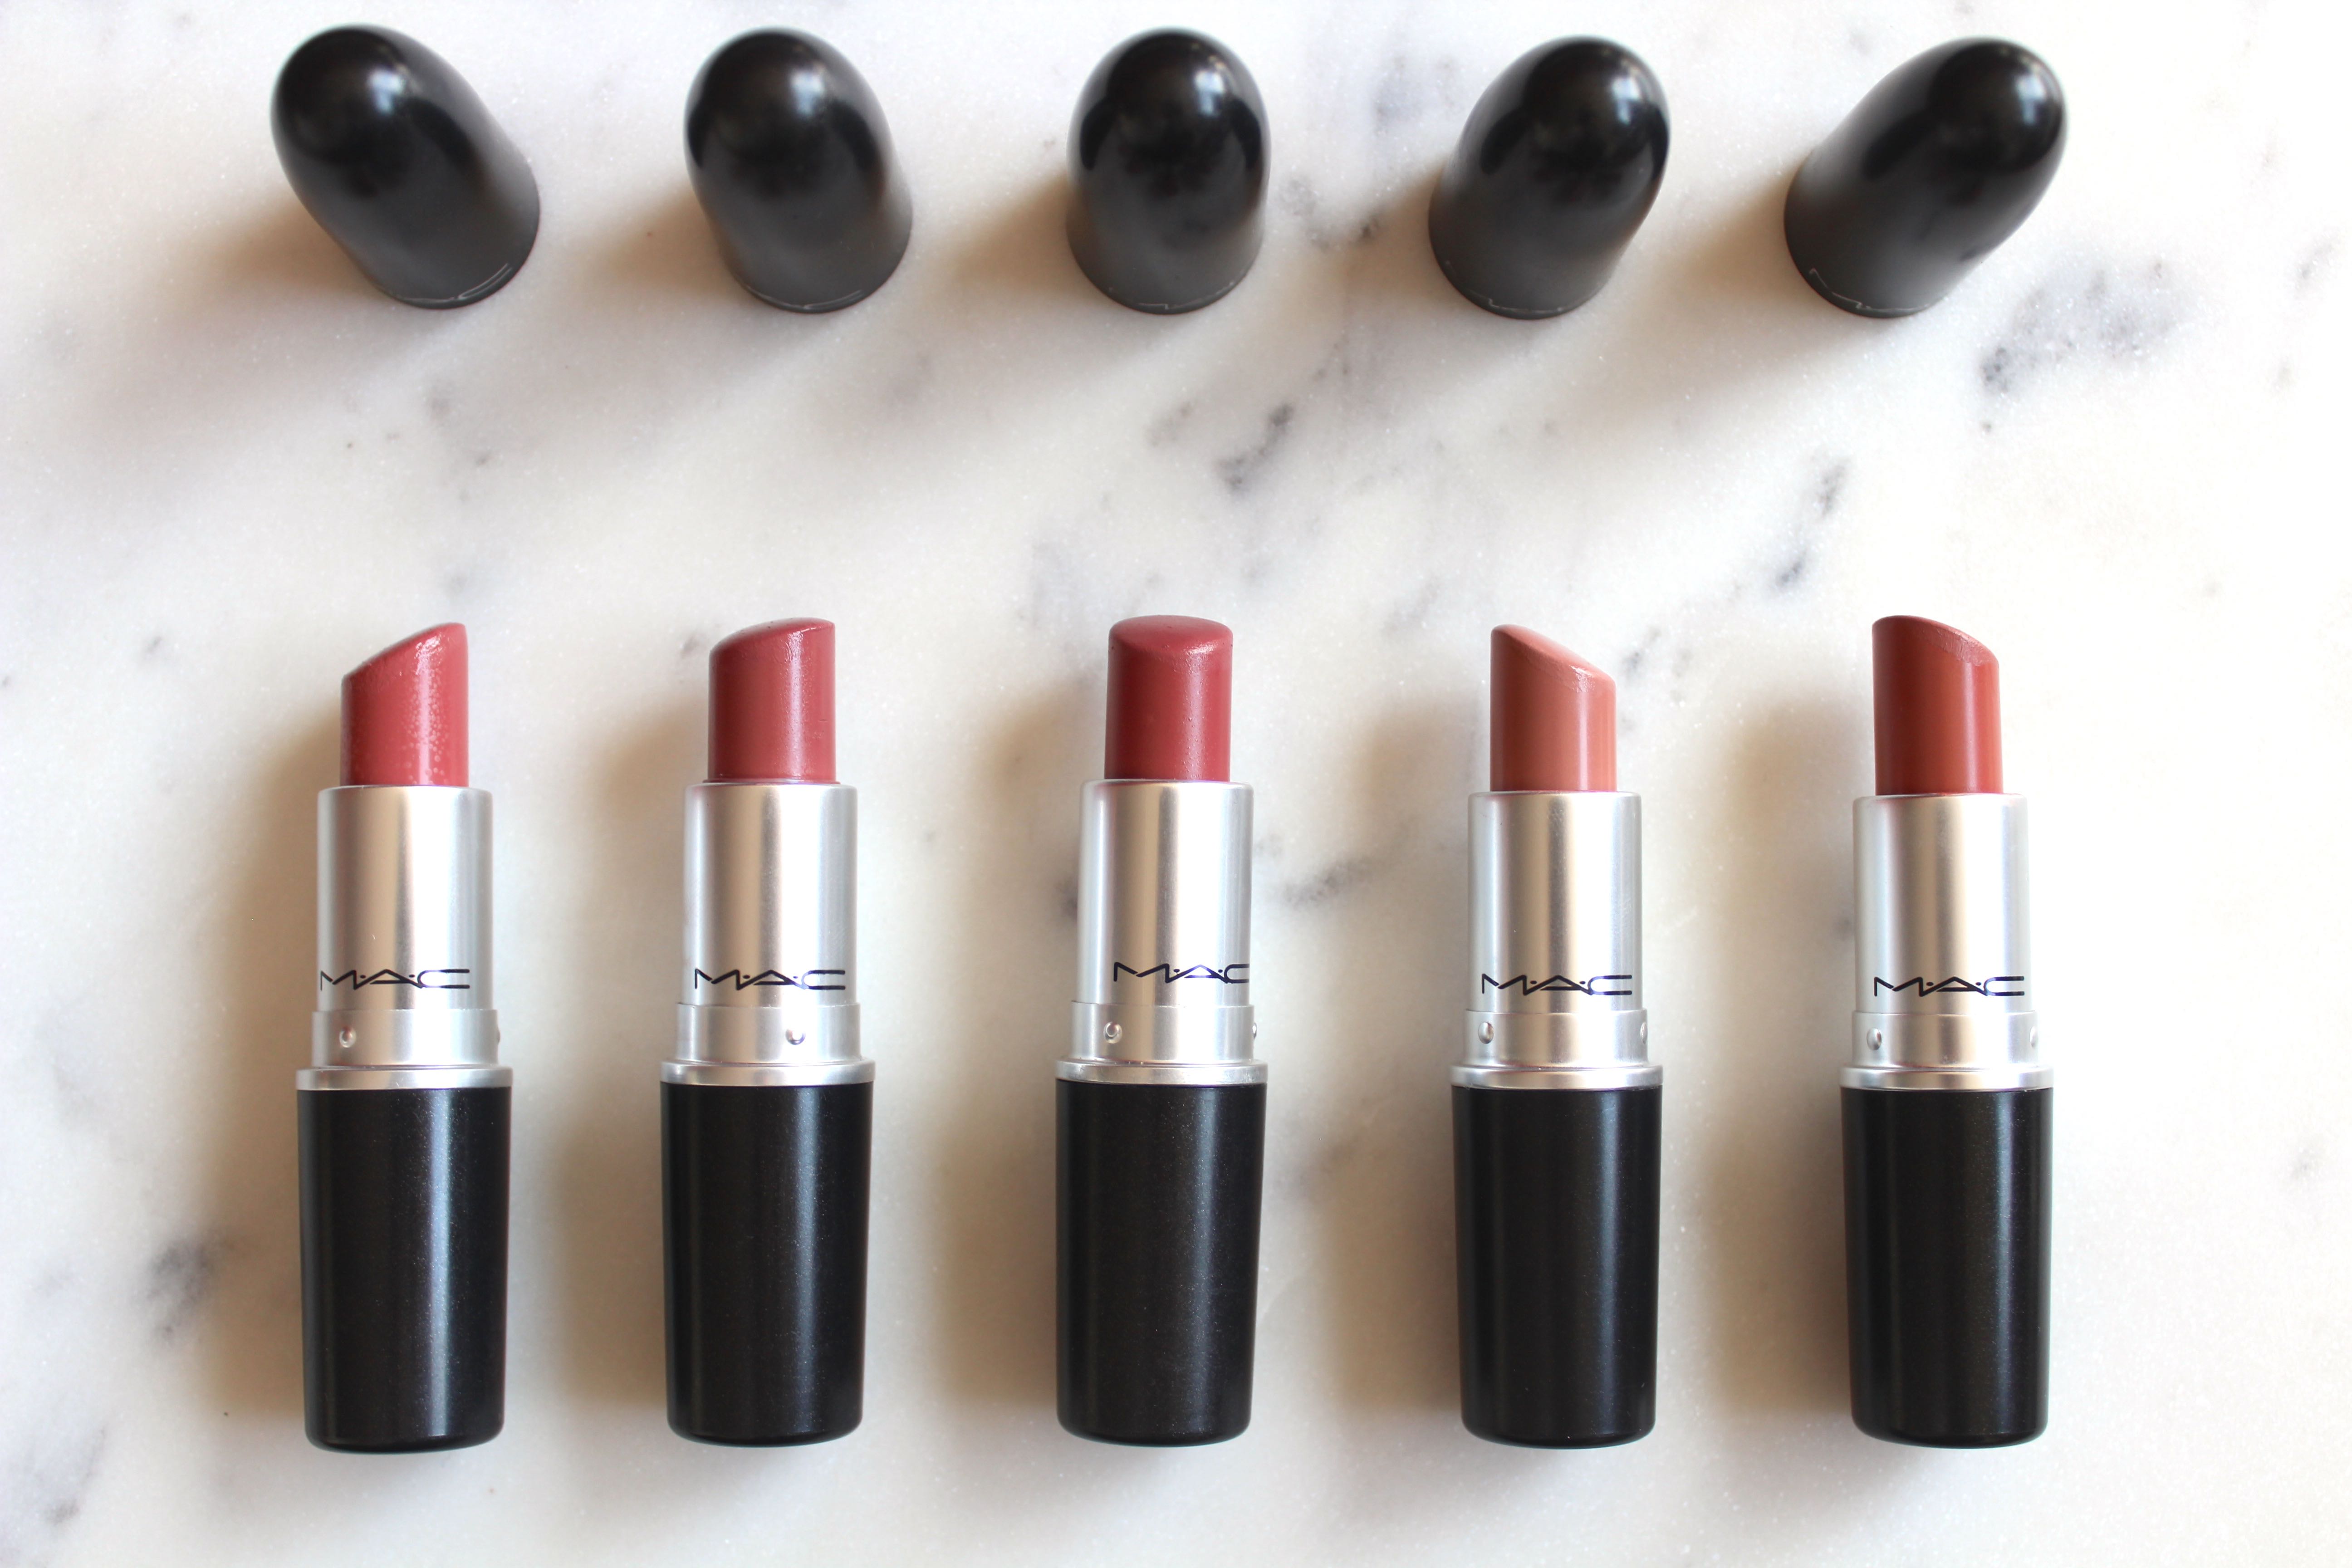 My 5 Favourite MAC lipsticks by Facemadeup